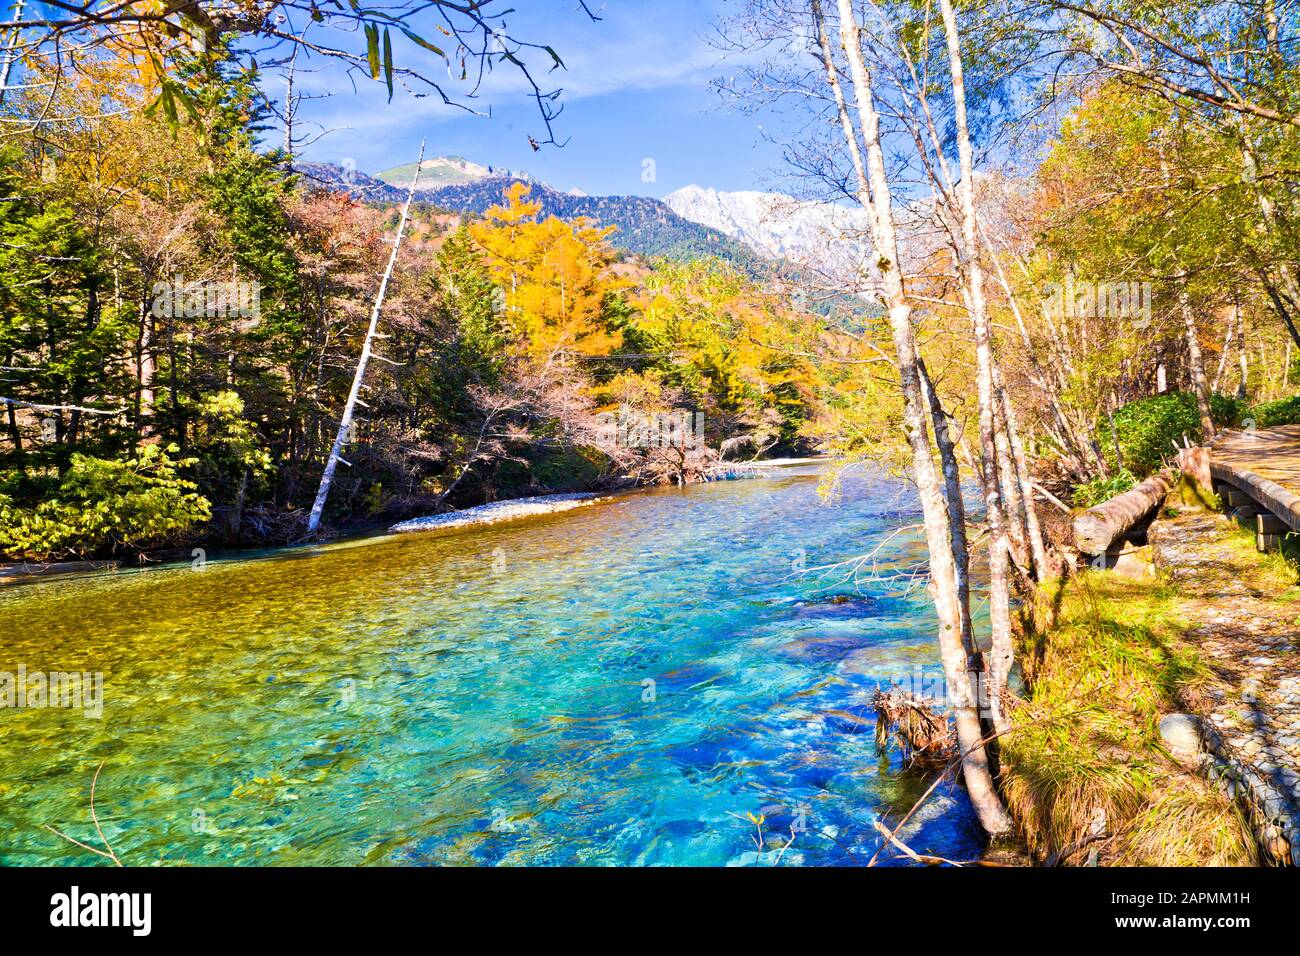 Azusa River flowing through Kamikochi national park in Nagano Prefecture, Japan. The autumn leaves season is beautiful. Stock Photo